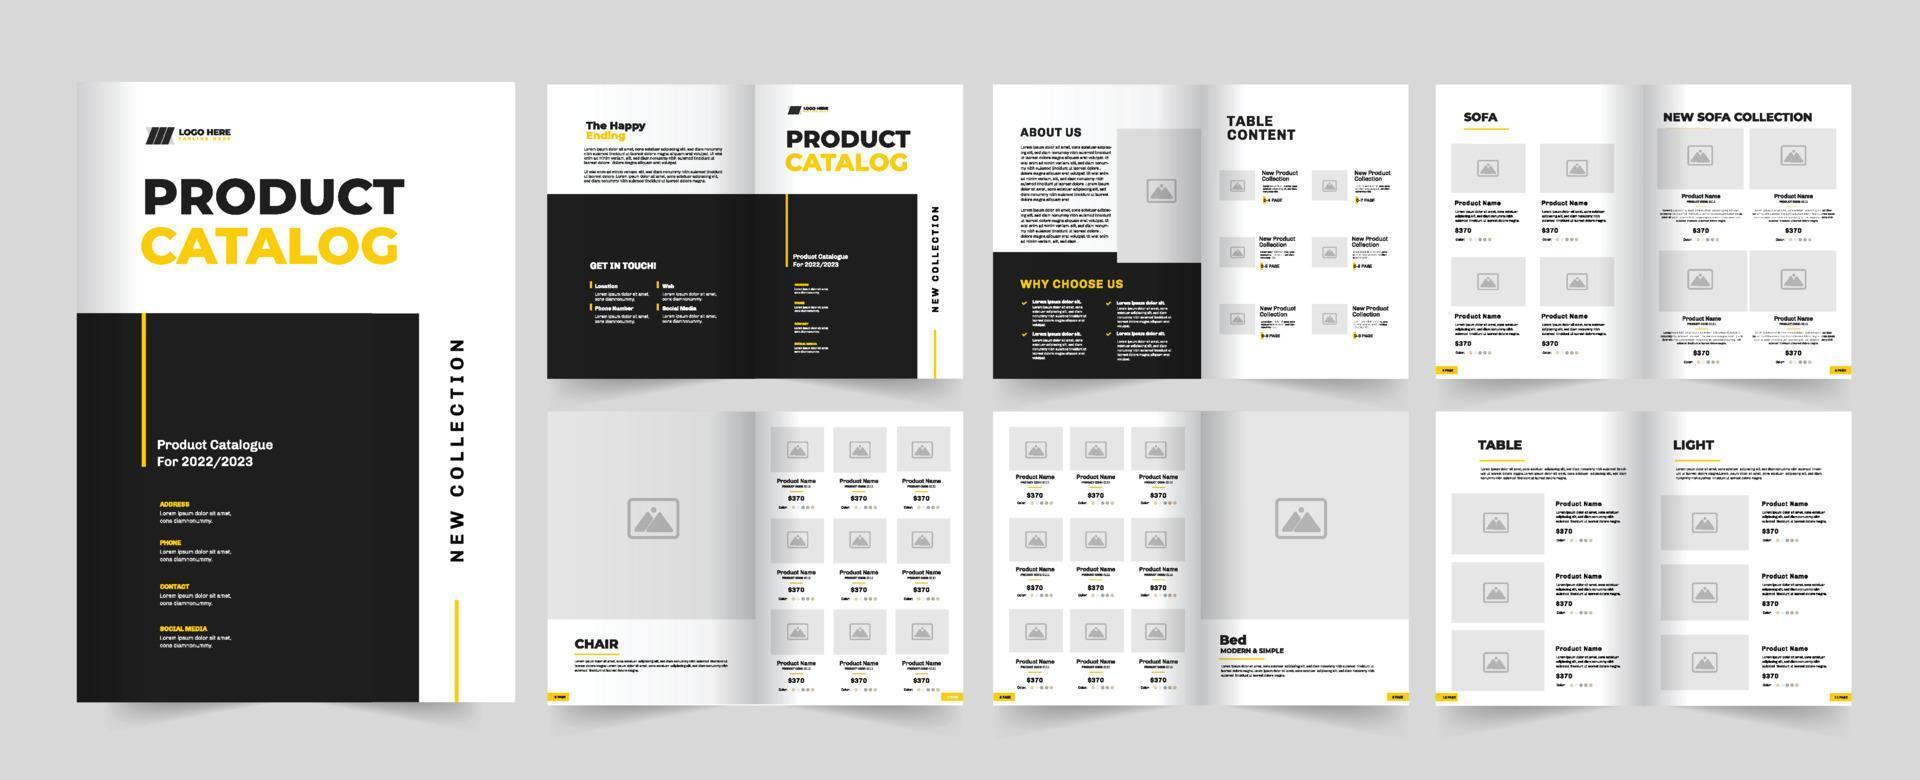 Product Catalog and  Catalog Template Design vector